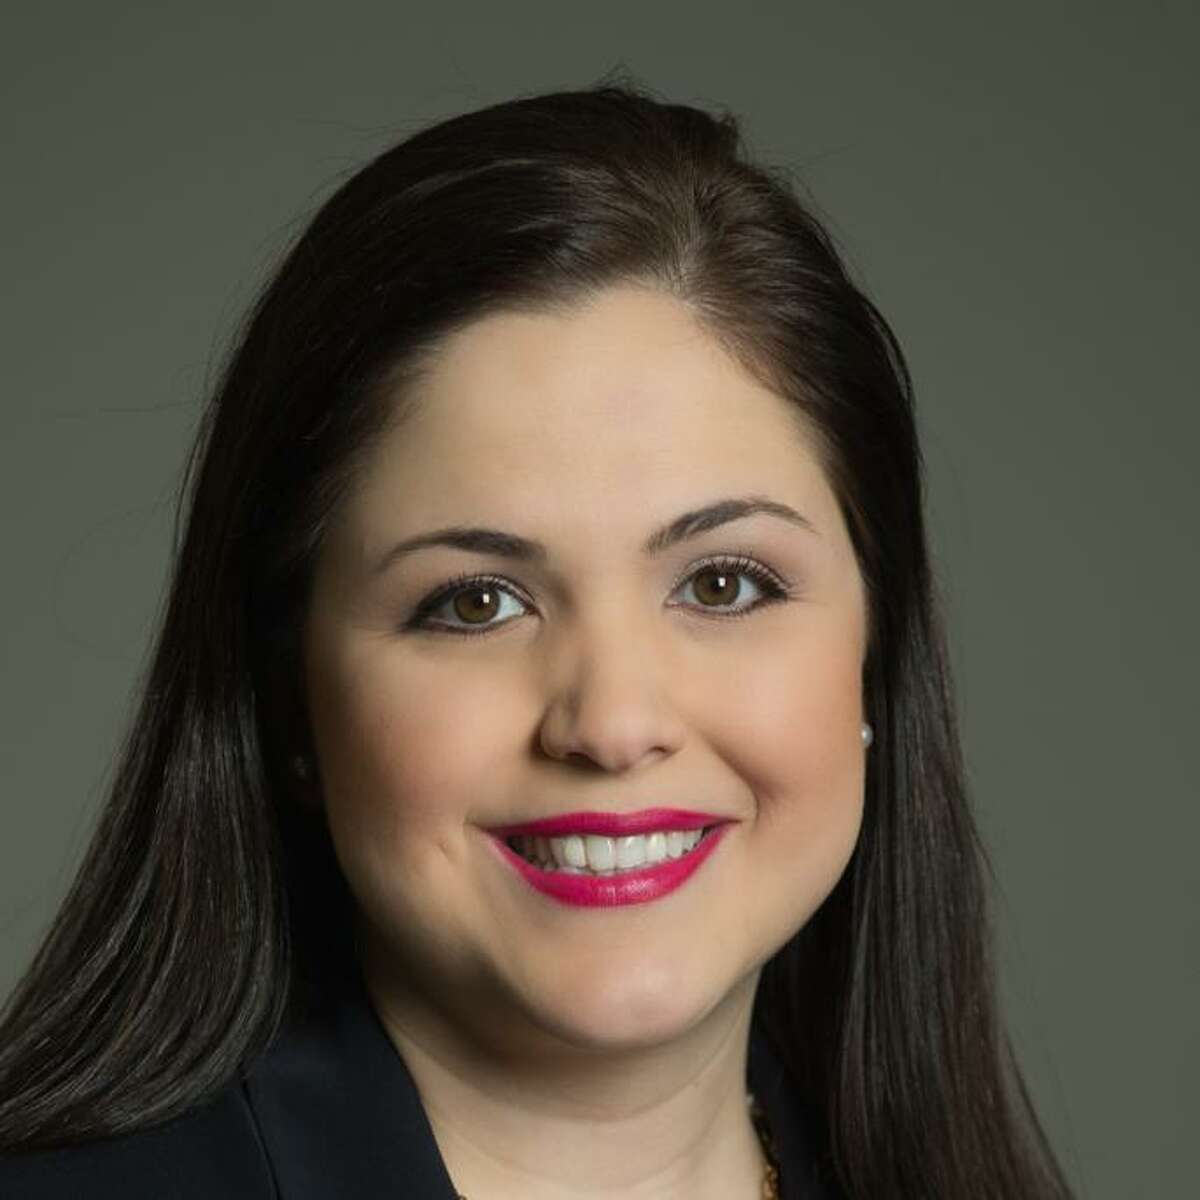 State Rep. Ana Hernandez represents Texas House District 143